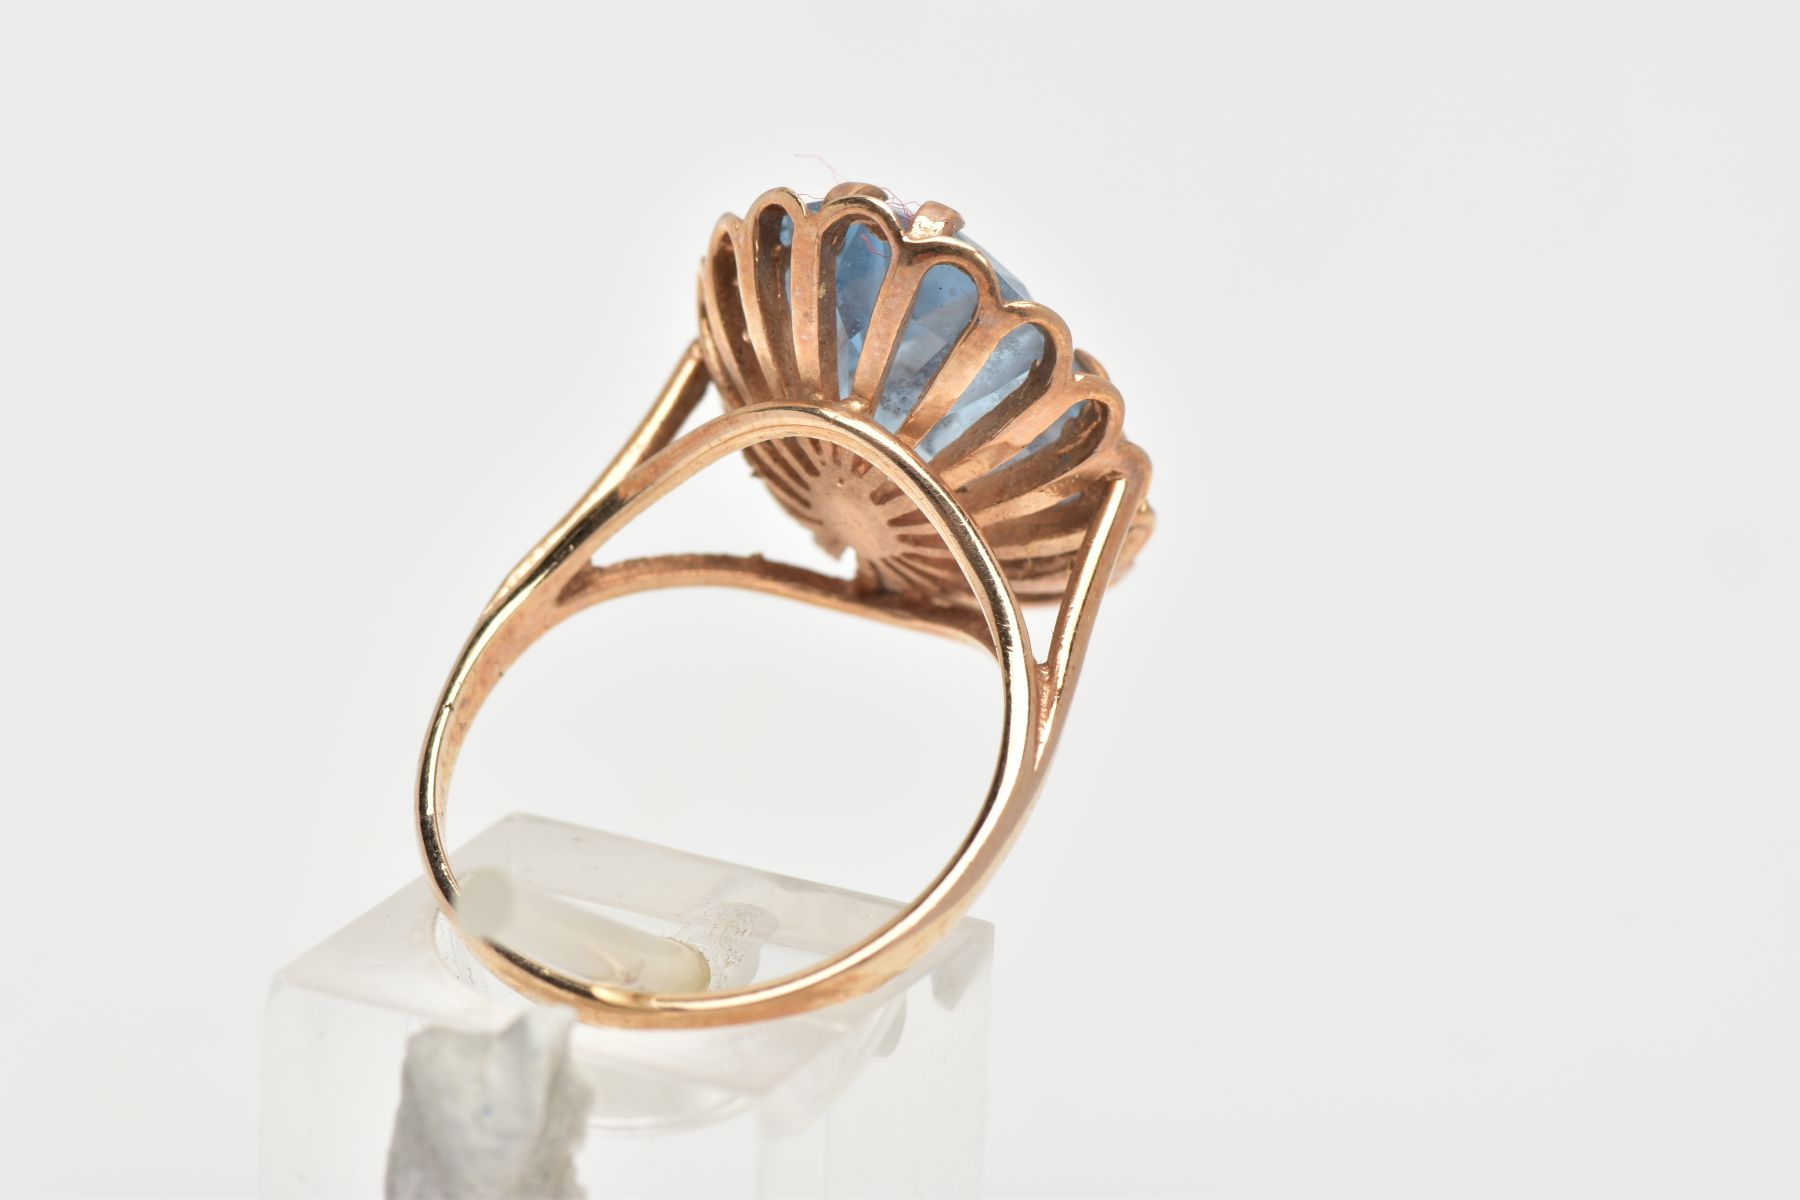 A TOPAZ DRESS RING, a large oval cut blue stone assessed as topaz, approximate length 17mm, - Image 3 of 4